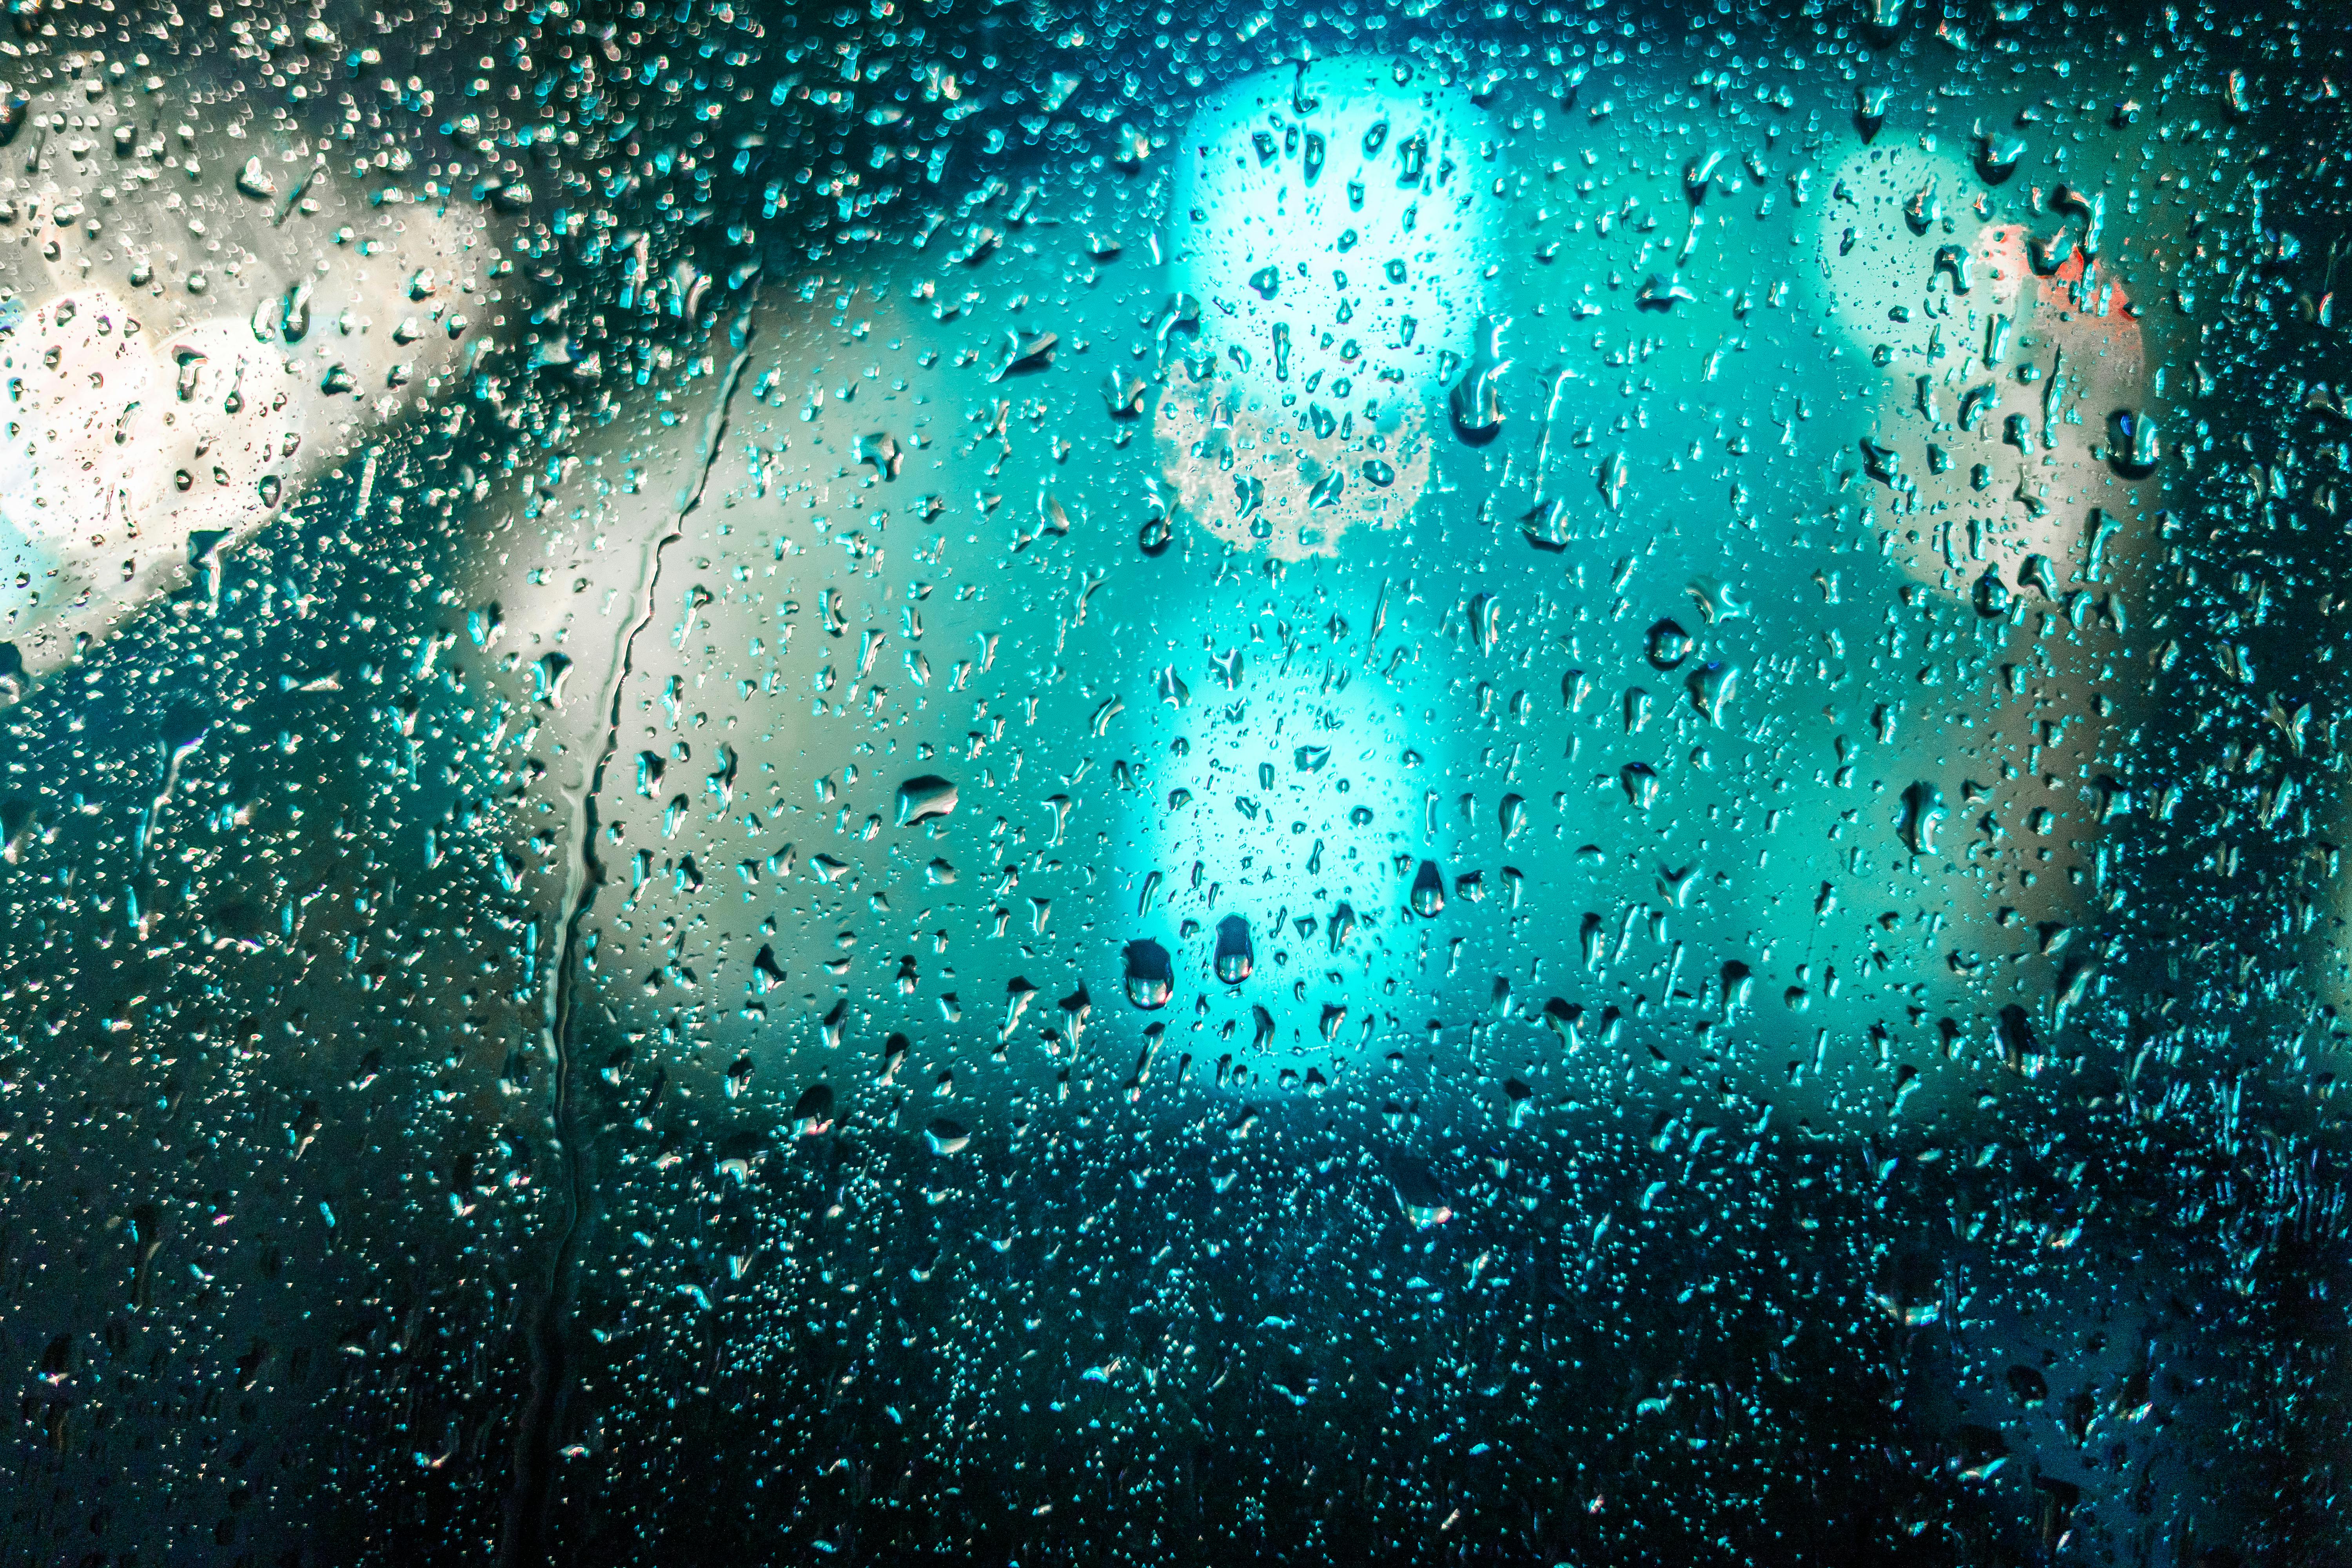 Rain full hd, hdtv, fhd, 1080p wallpapers hd, desktop backgrounds  1920x1080, images and pictures